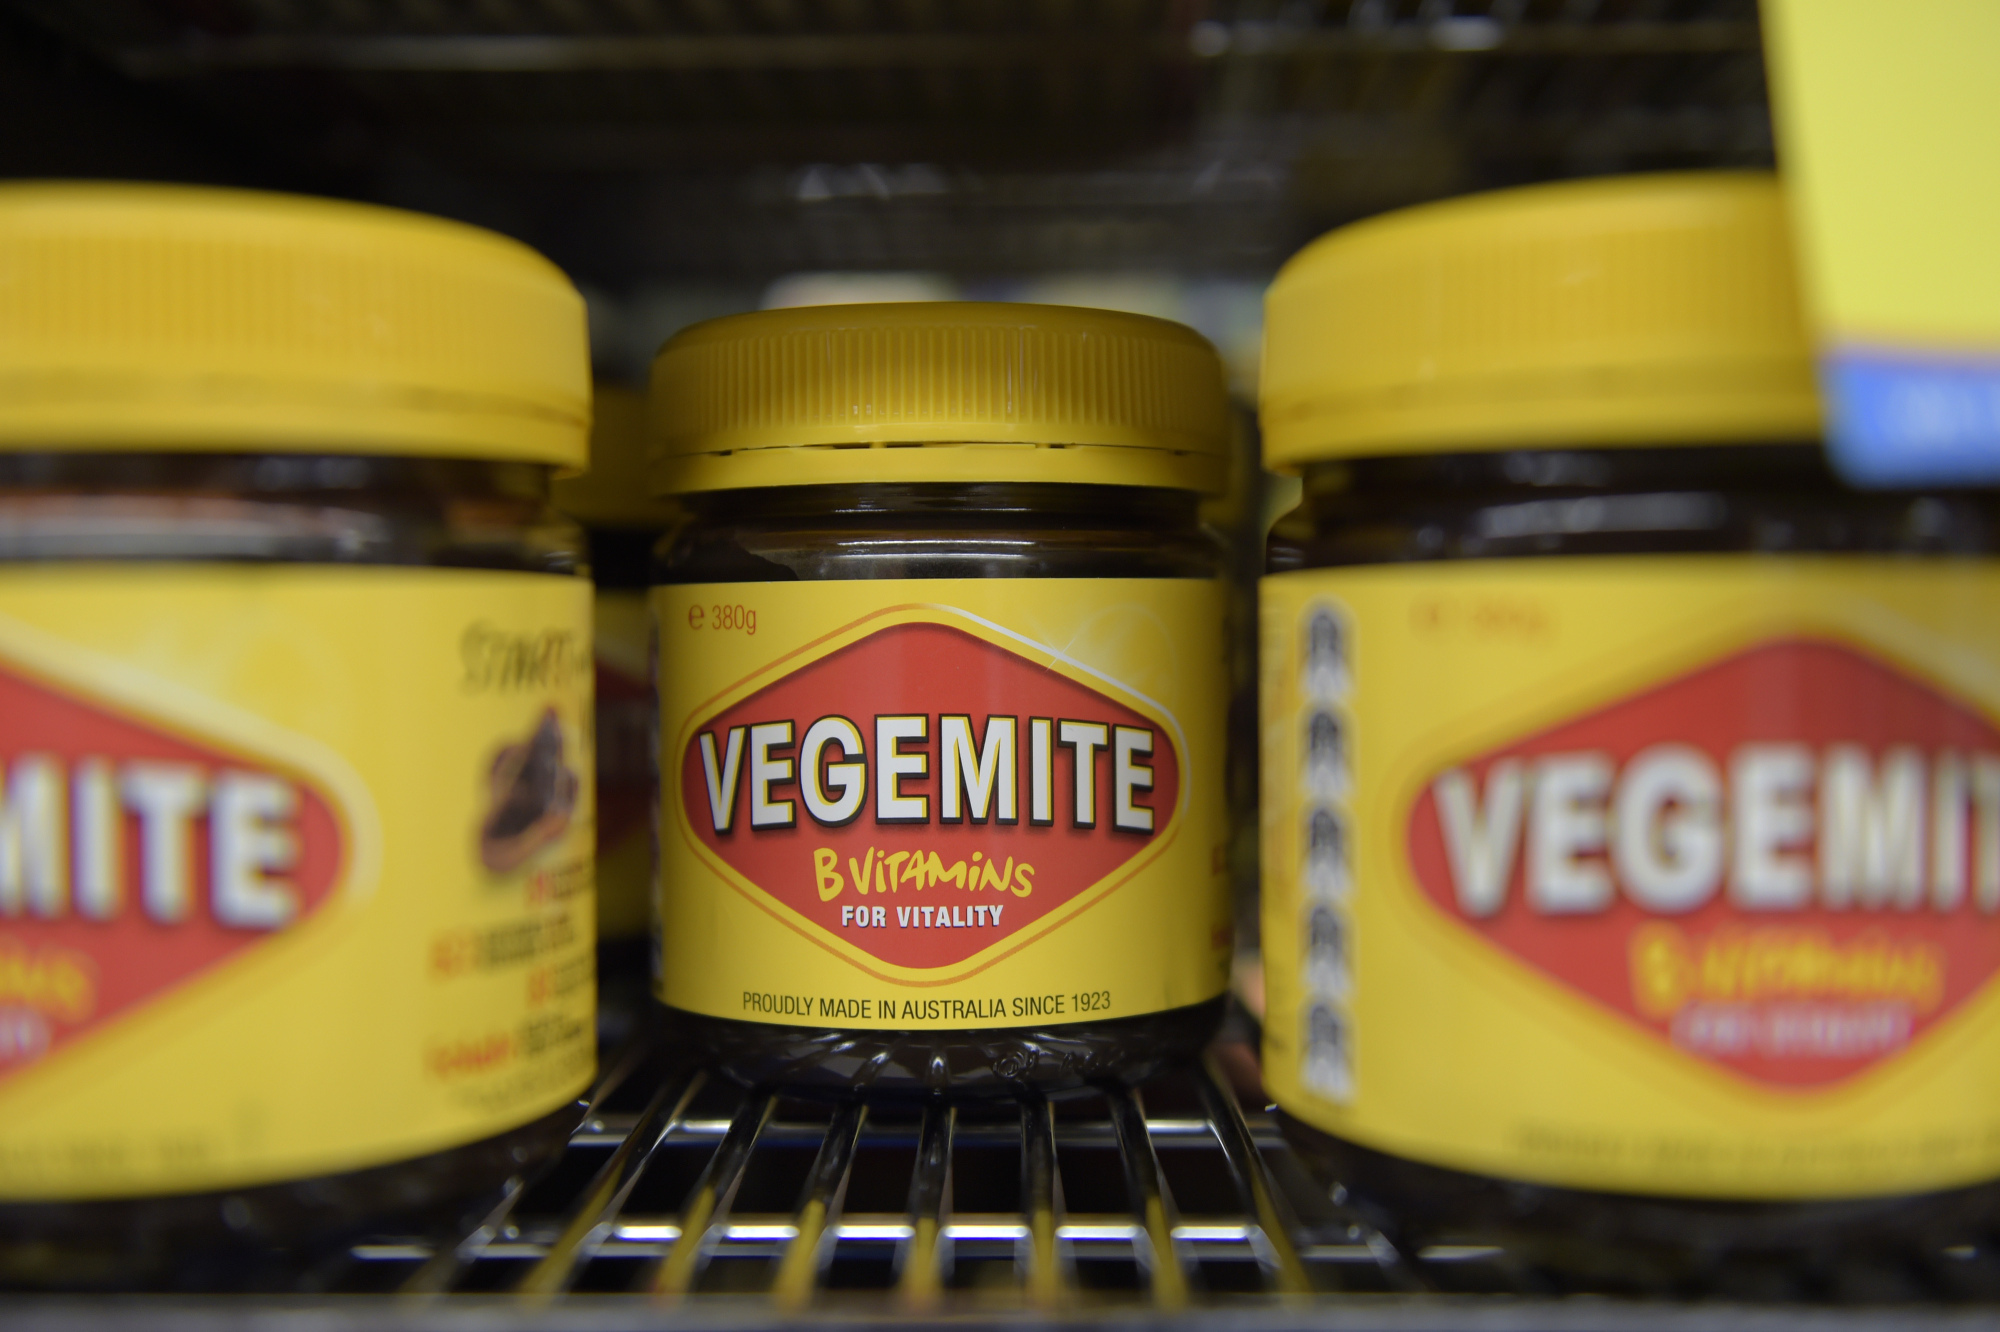 May 2023 APAC advertiser of the month: Vegemite